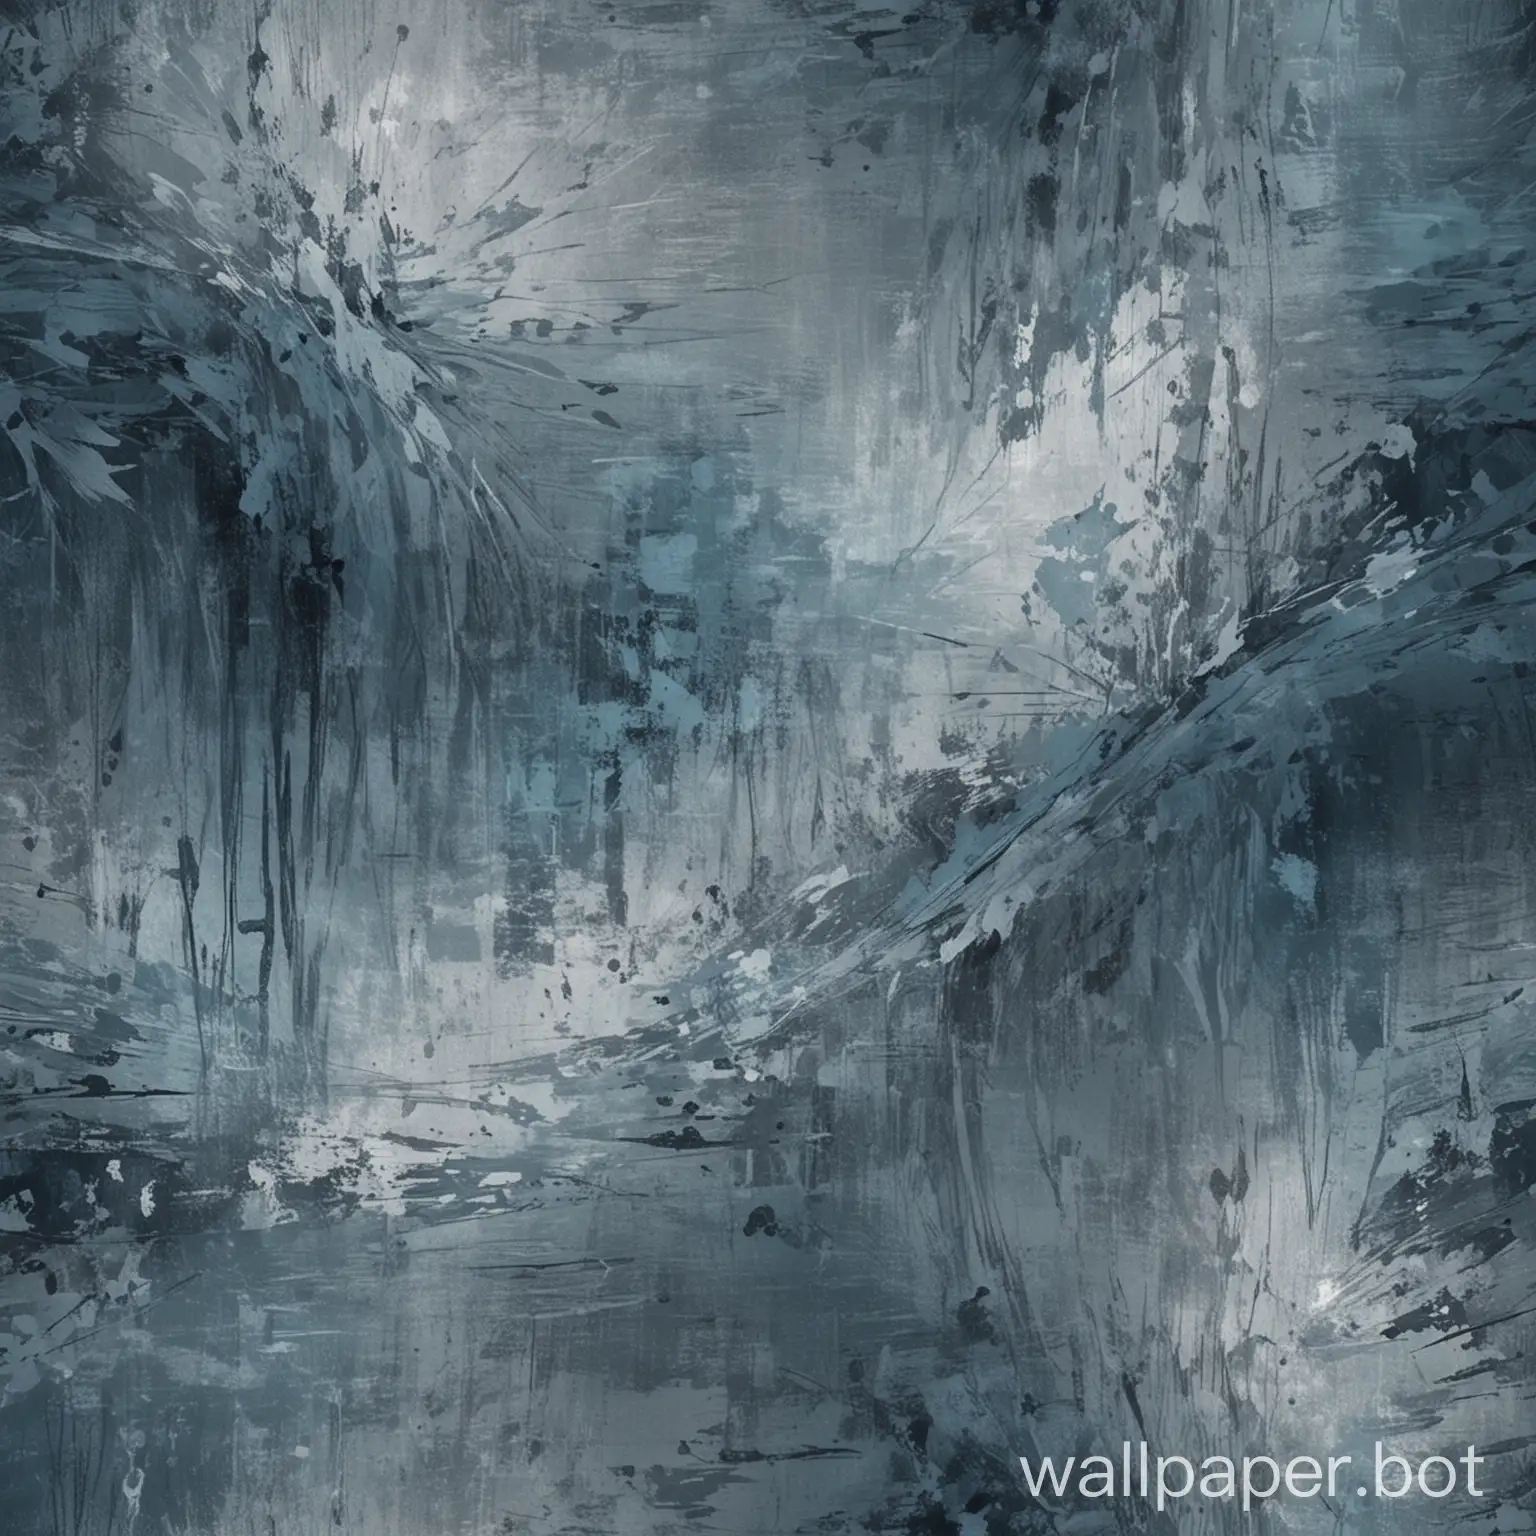 Wallpaper abstract in blue and grey tones